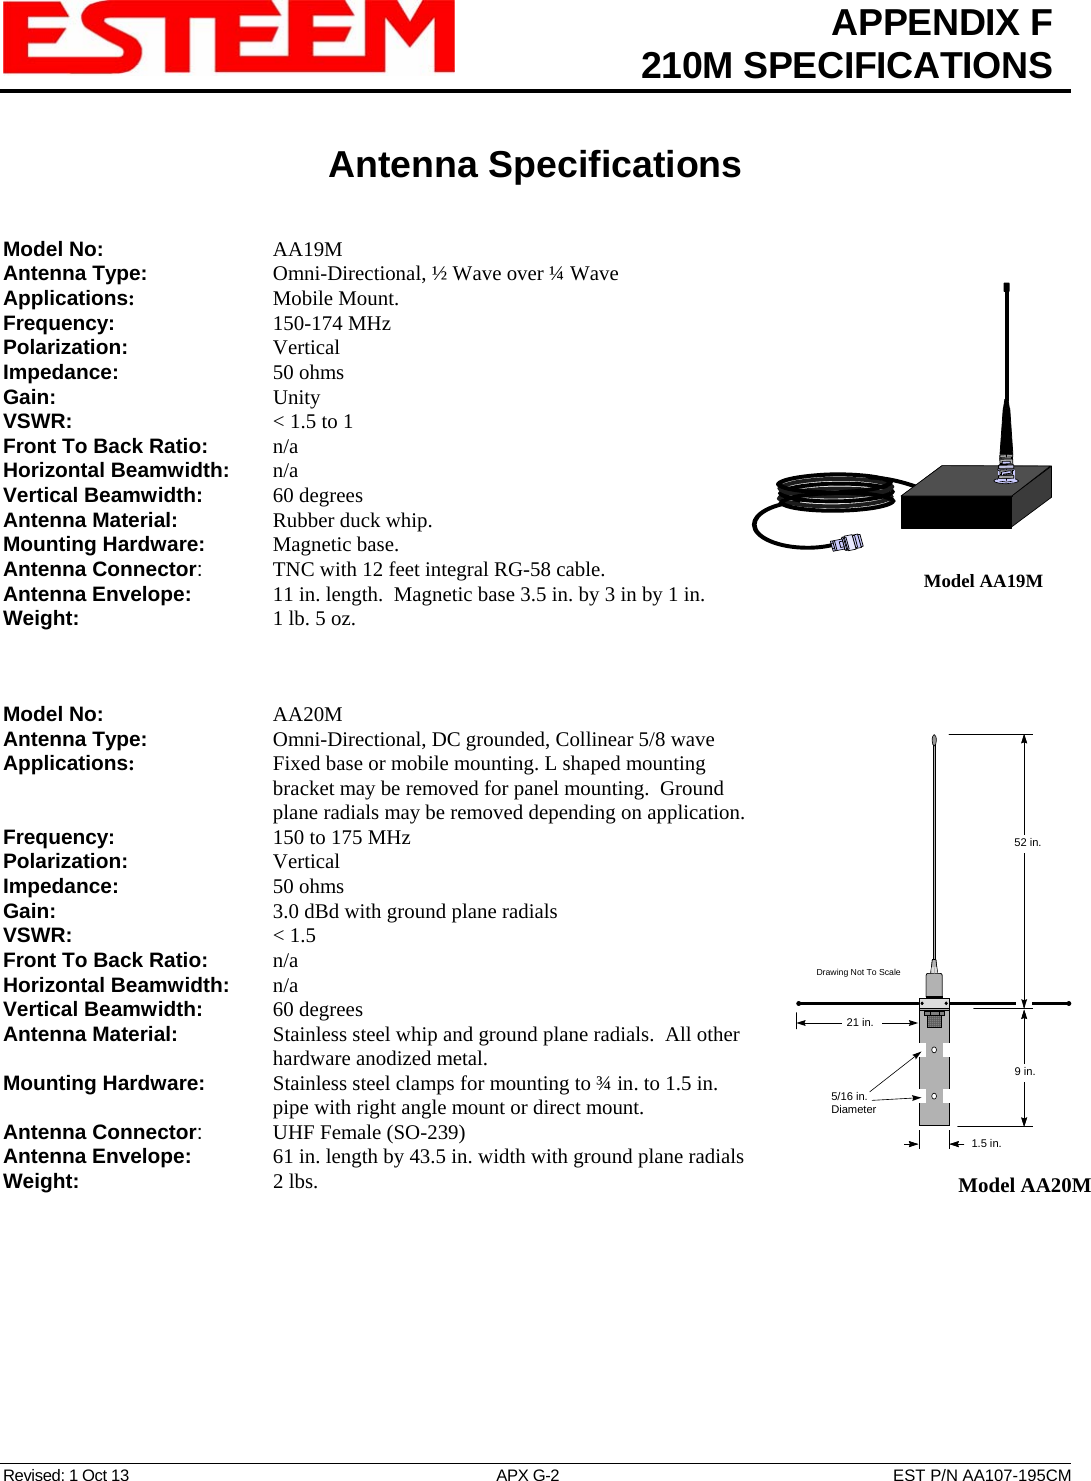  APPENDIX F  210M SPECIFICATIONS   Antenna Specifications   Revised: 1 Oct 13  APX G-2  EST P/N AA107-195CM Model No:    AA19M Antenna Type:   Omni-Directional, ½ Wave over ¼ Wave Model AA19MApplications:    Mobile Mount. Frequency:    150-174 MHz  Polarization:    Vertical Impedance:    50 ohms Gain:     Unity VSWR:      &lt; 1.5 to 1  Front To Back Ratio:   n/a Horizontal Beamwidth:  n/a Vertical Beamwidth:      60 degrees Antenna Material:     Rubber duck whip.  Mounting Hardware:      Magnetic base.  Antenna Connector:    TNC with 12 feet integral RG-58 cable. Antenna Envelope:   11 in. length.  Magnetic base 3.5 in. by 3 in by 1 in. Weight:           1 lb. 5 oz.     Model No:    AA20M  1.5 in.9 in.Drawing Not To Scale5/16 in.Diameter52 in.21 in.Model AA20M  Antenna Type:   Omni-Directional, DC grounded, Collinear 5/8 wave  Applications:       Fixed base or mobile mounting. L shaped mounting bracket may be removed for panel mounting.  Ground plane radials may be removed depending on application. Frequency:    150 to 175 MHz  Polarization:    Vertical Impedance:    50 ohms Gain:          3.0 dBd with ground plane radials VSWR:      &lt; 1.5  Front To Back Ratio:   n/a Horizontal Beamwidth:  n/a Vertical Beamwidth:      60 degrees Antenna Material:     Stainless steel whip and ground plane radials.  All other hardware anodized metal.  Mounting Hardware:      Stainless steel clamps for mounting to ¾ in. to 1.5 in. pipe with right angle mount or direct mount.  Antenna Connector:    UHF Female (SO-239) Antenna Envelope:   61 in. length by 43.5 in. width with ground plane radials Weight:       2 lbs. 